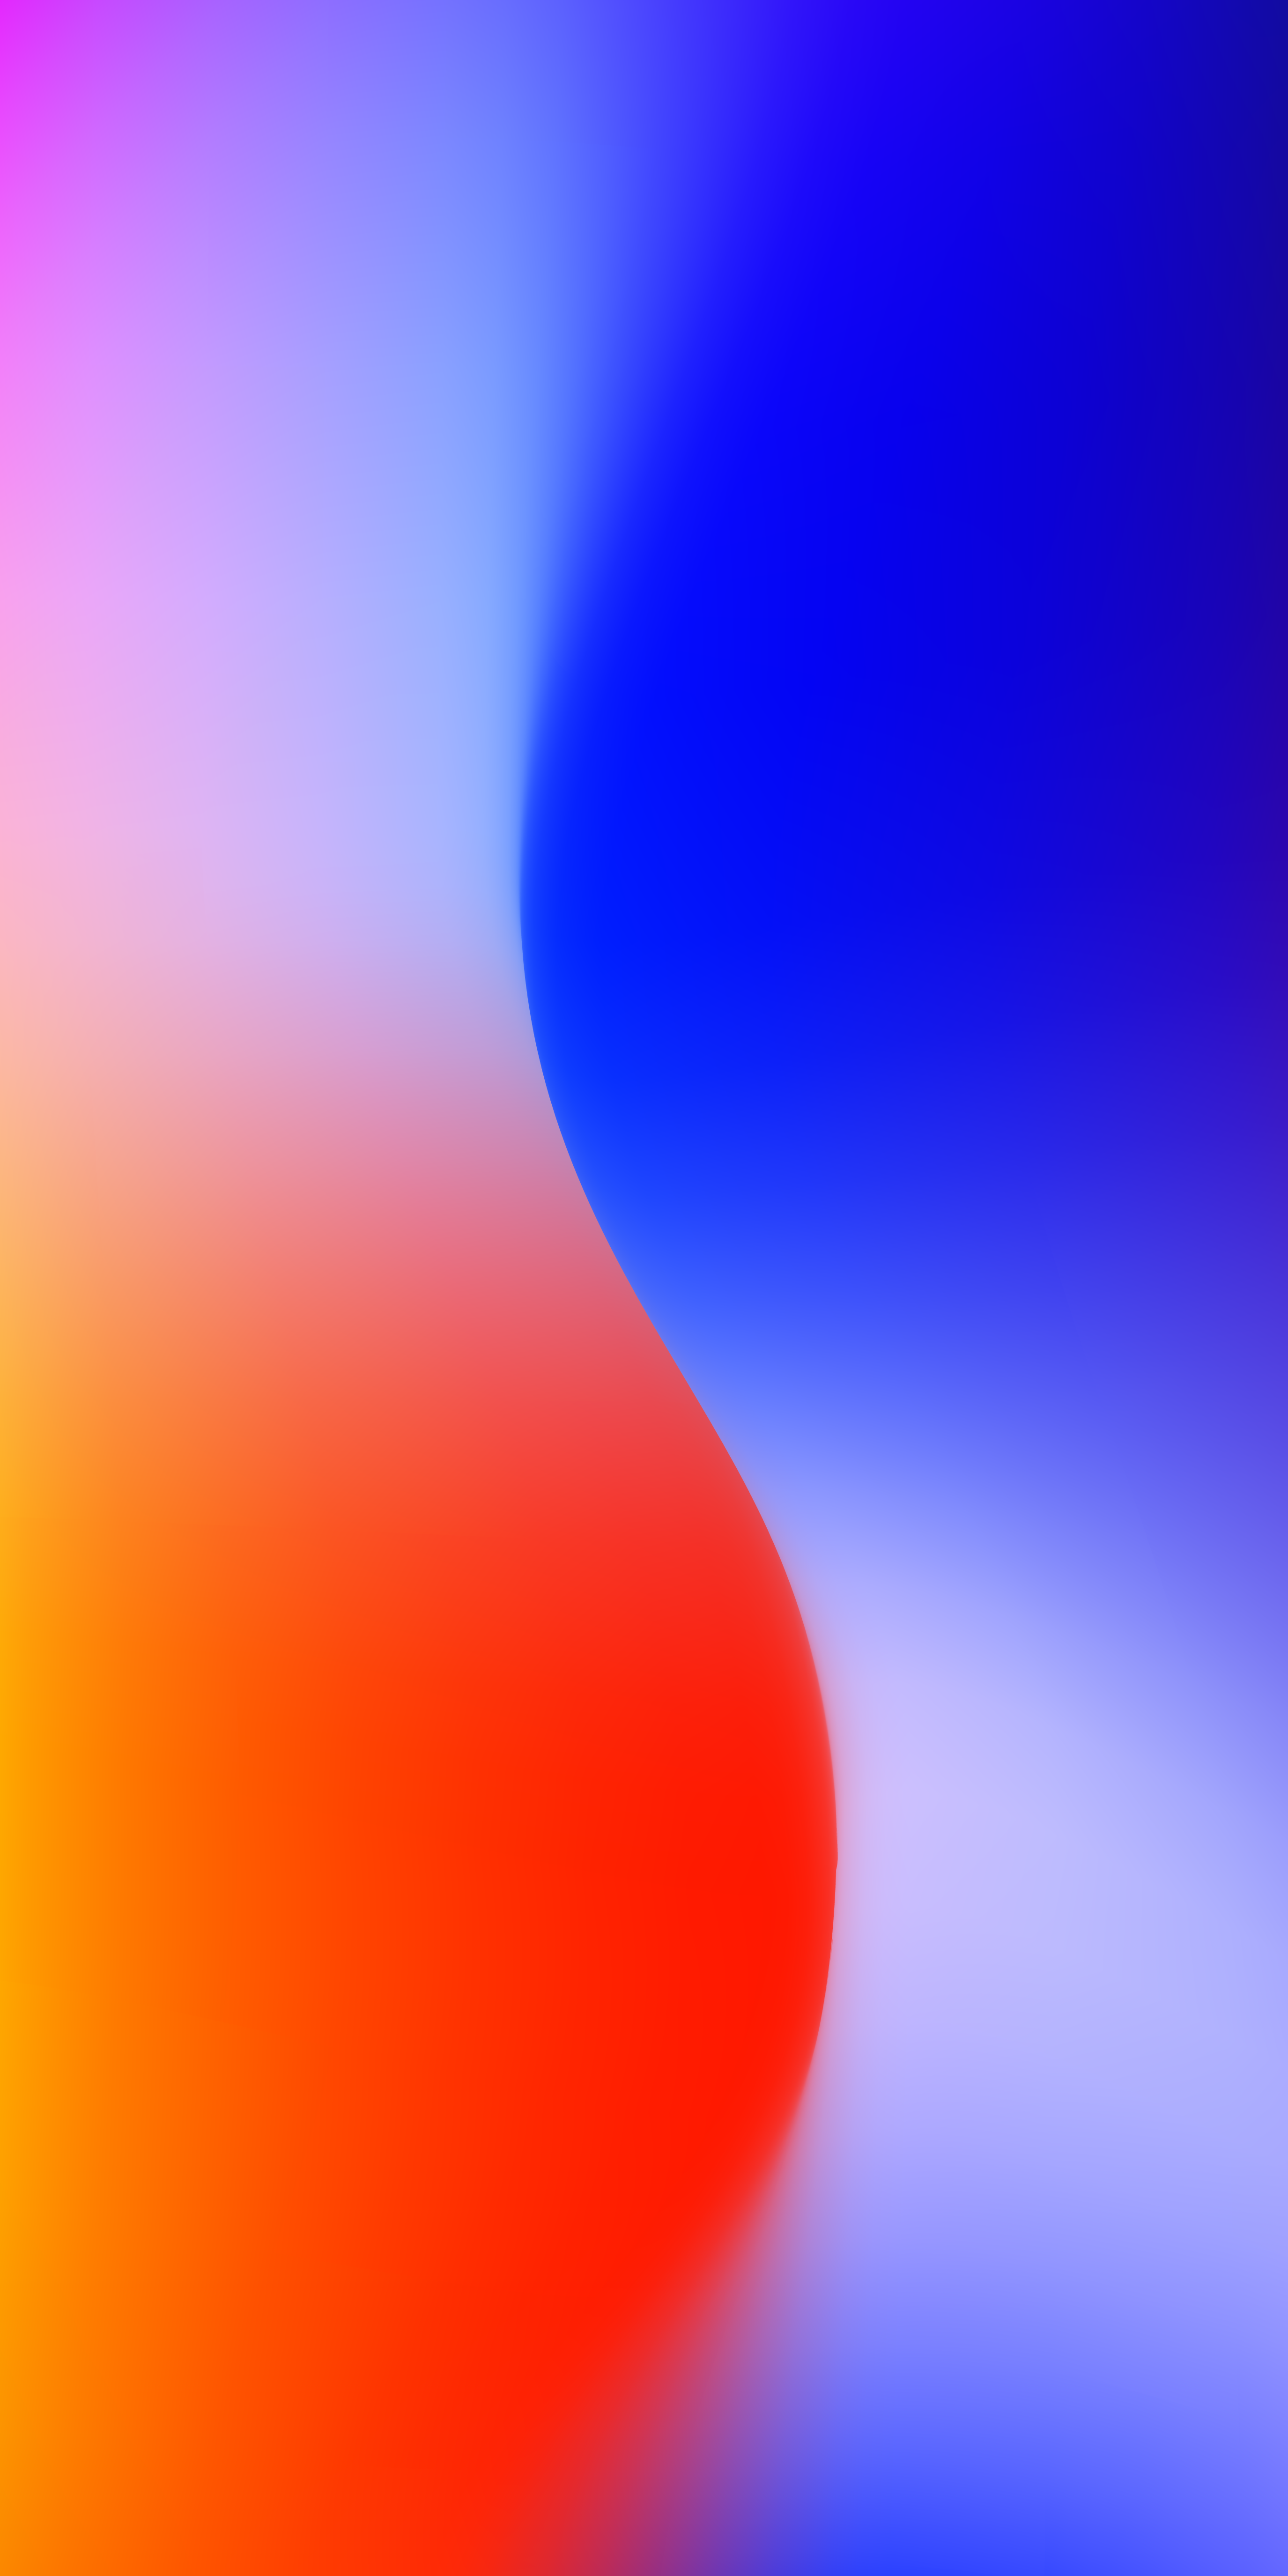 orange and blue gradient S by Ongliong11 Qhd wallpaper Phone